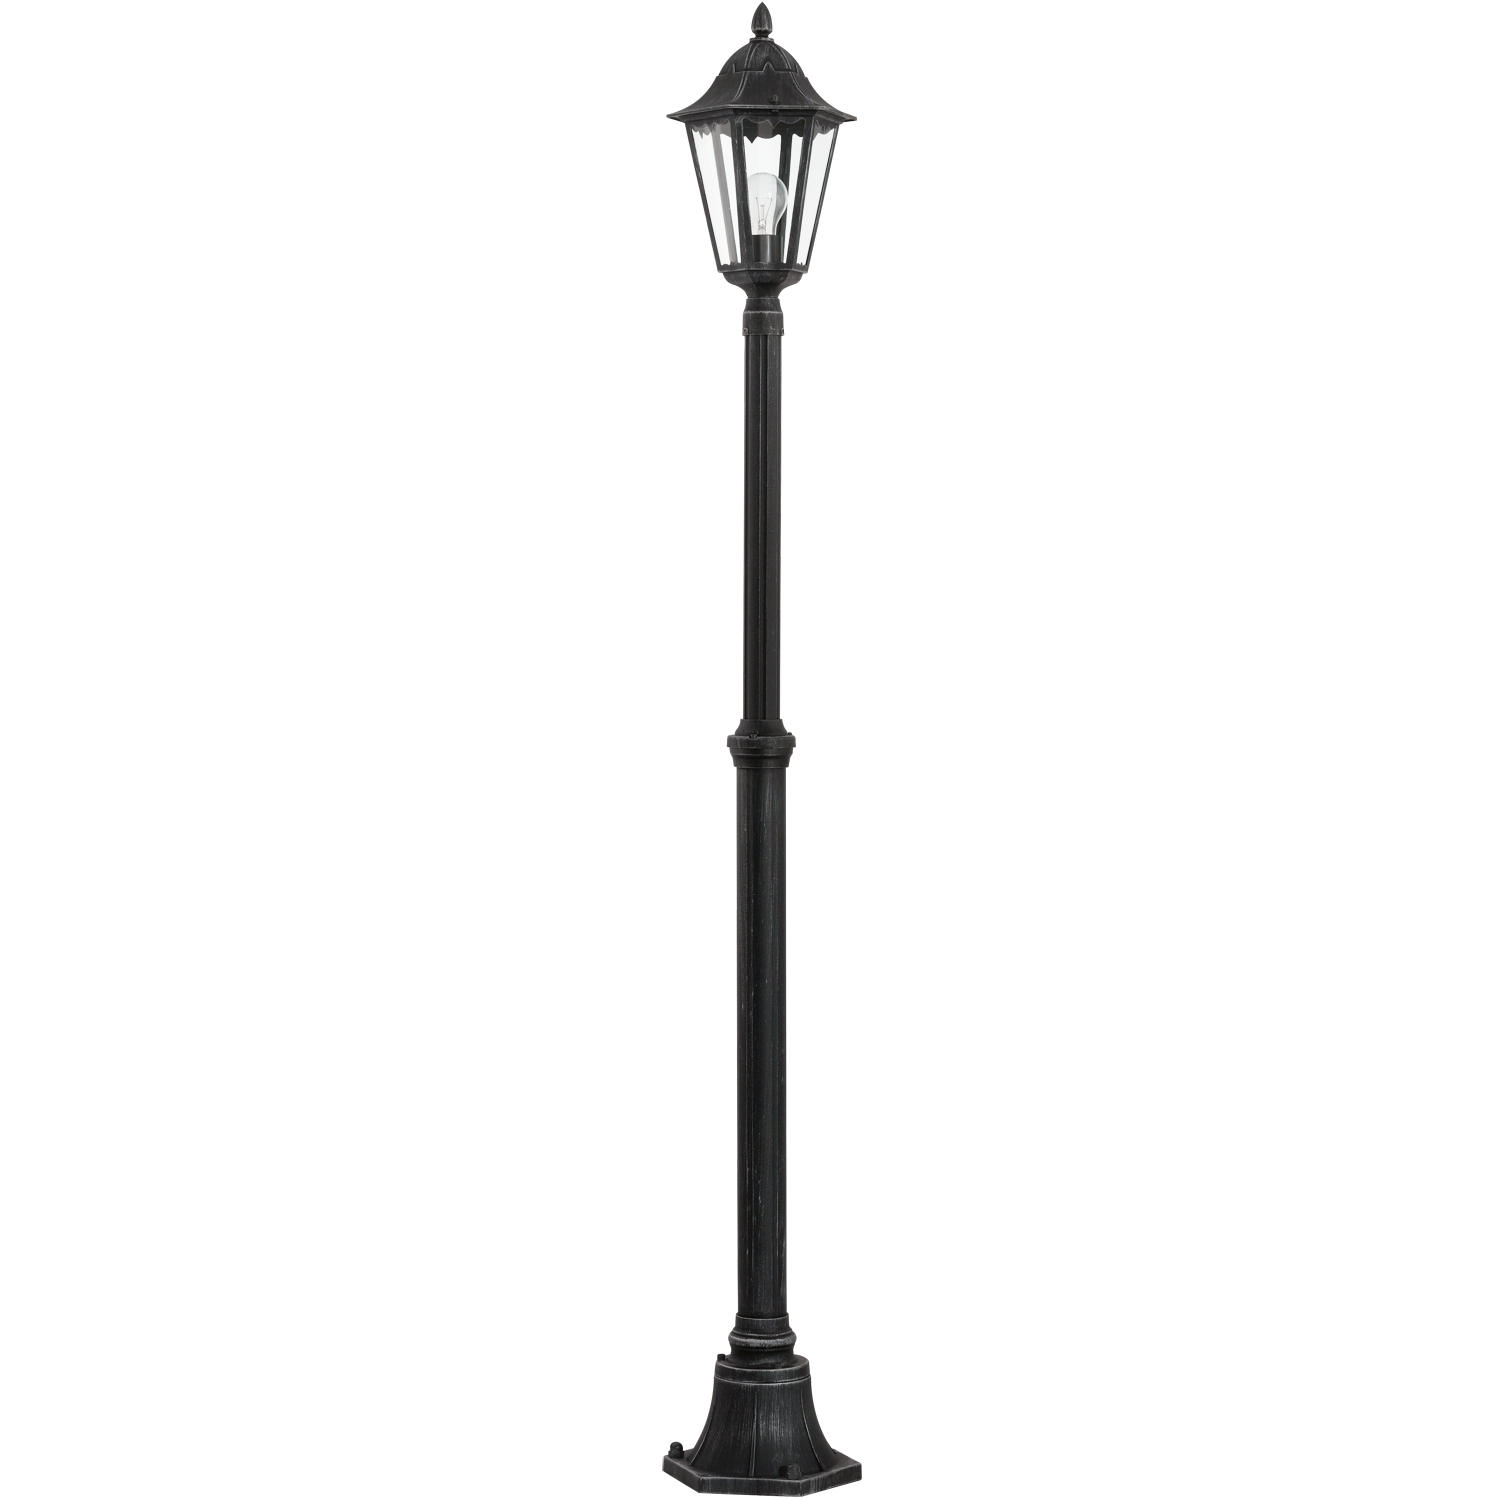 Street Light PNG High-Quality Image